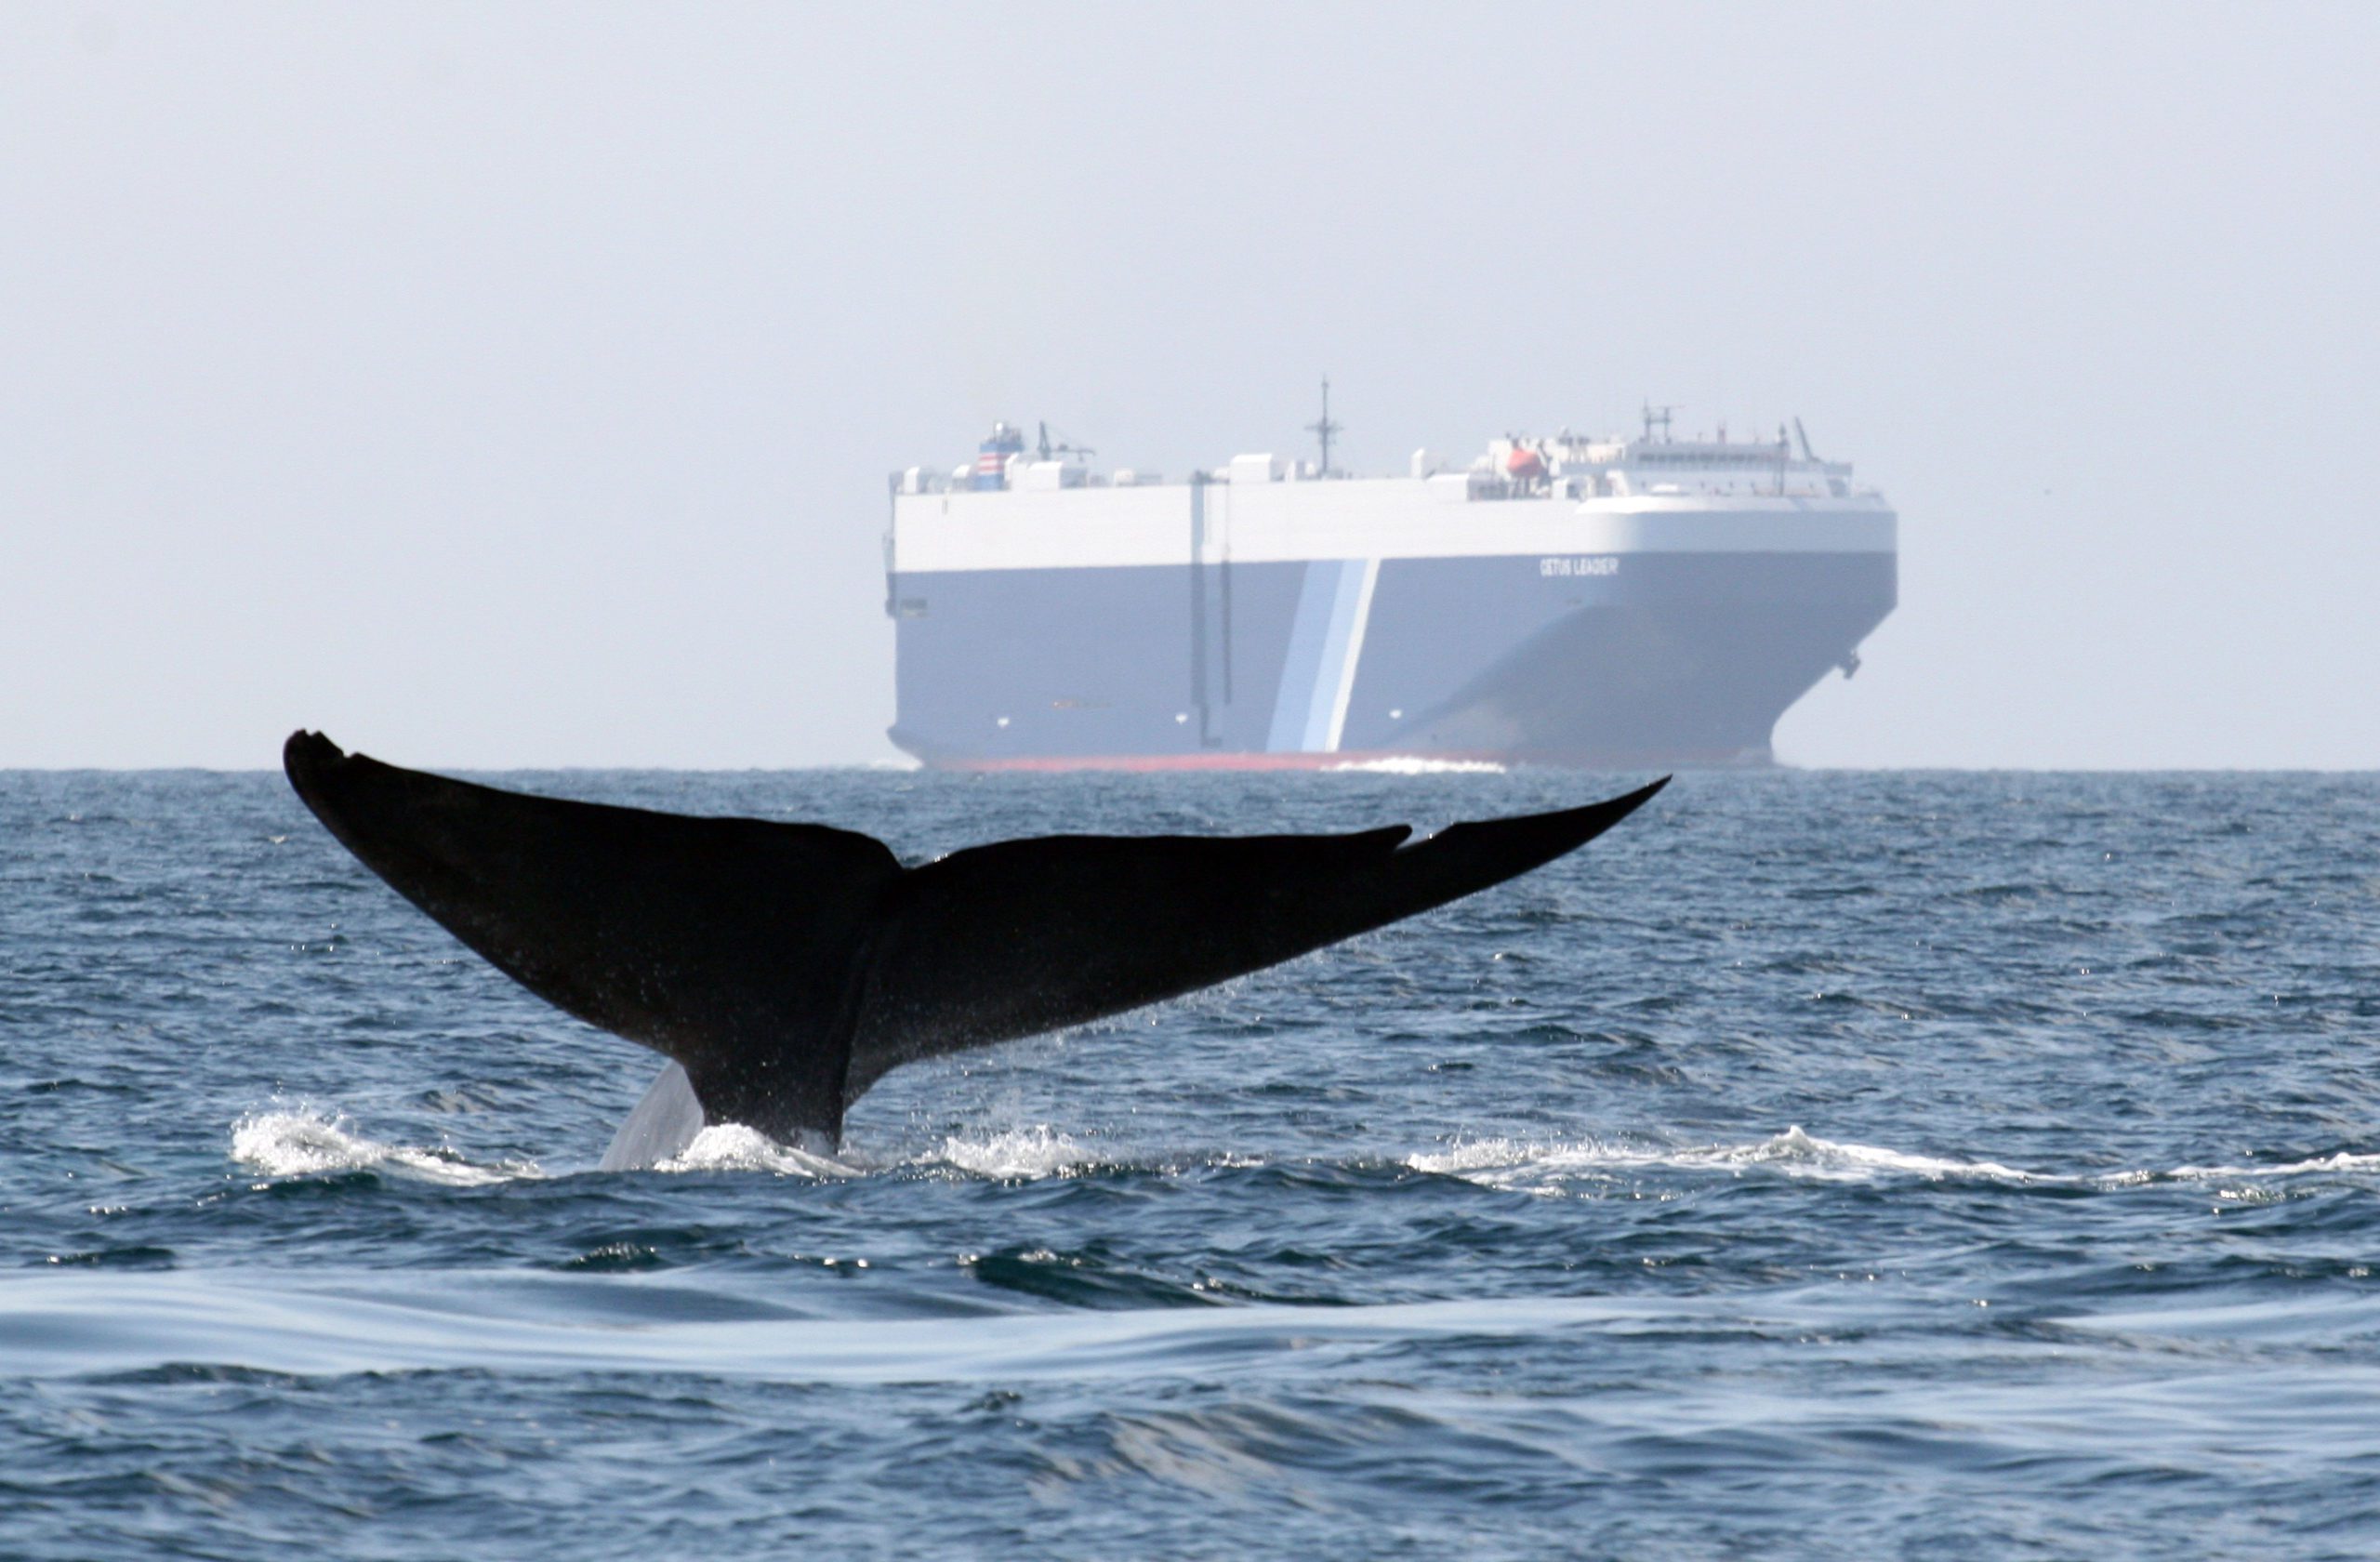 Fifteen global shipping companies slowed cargo ships off California coast to protect blue whales and blue skies